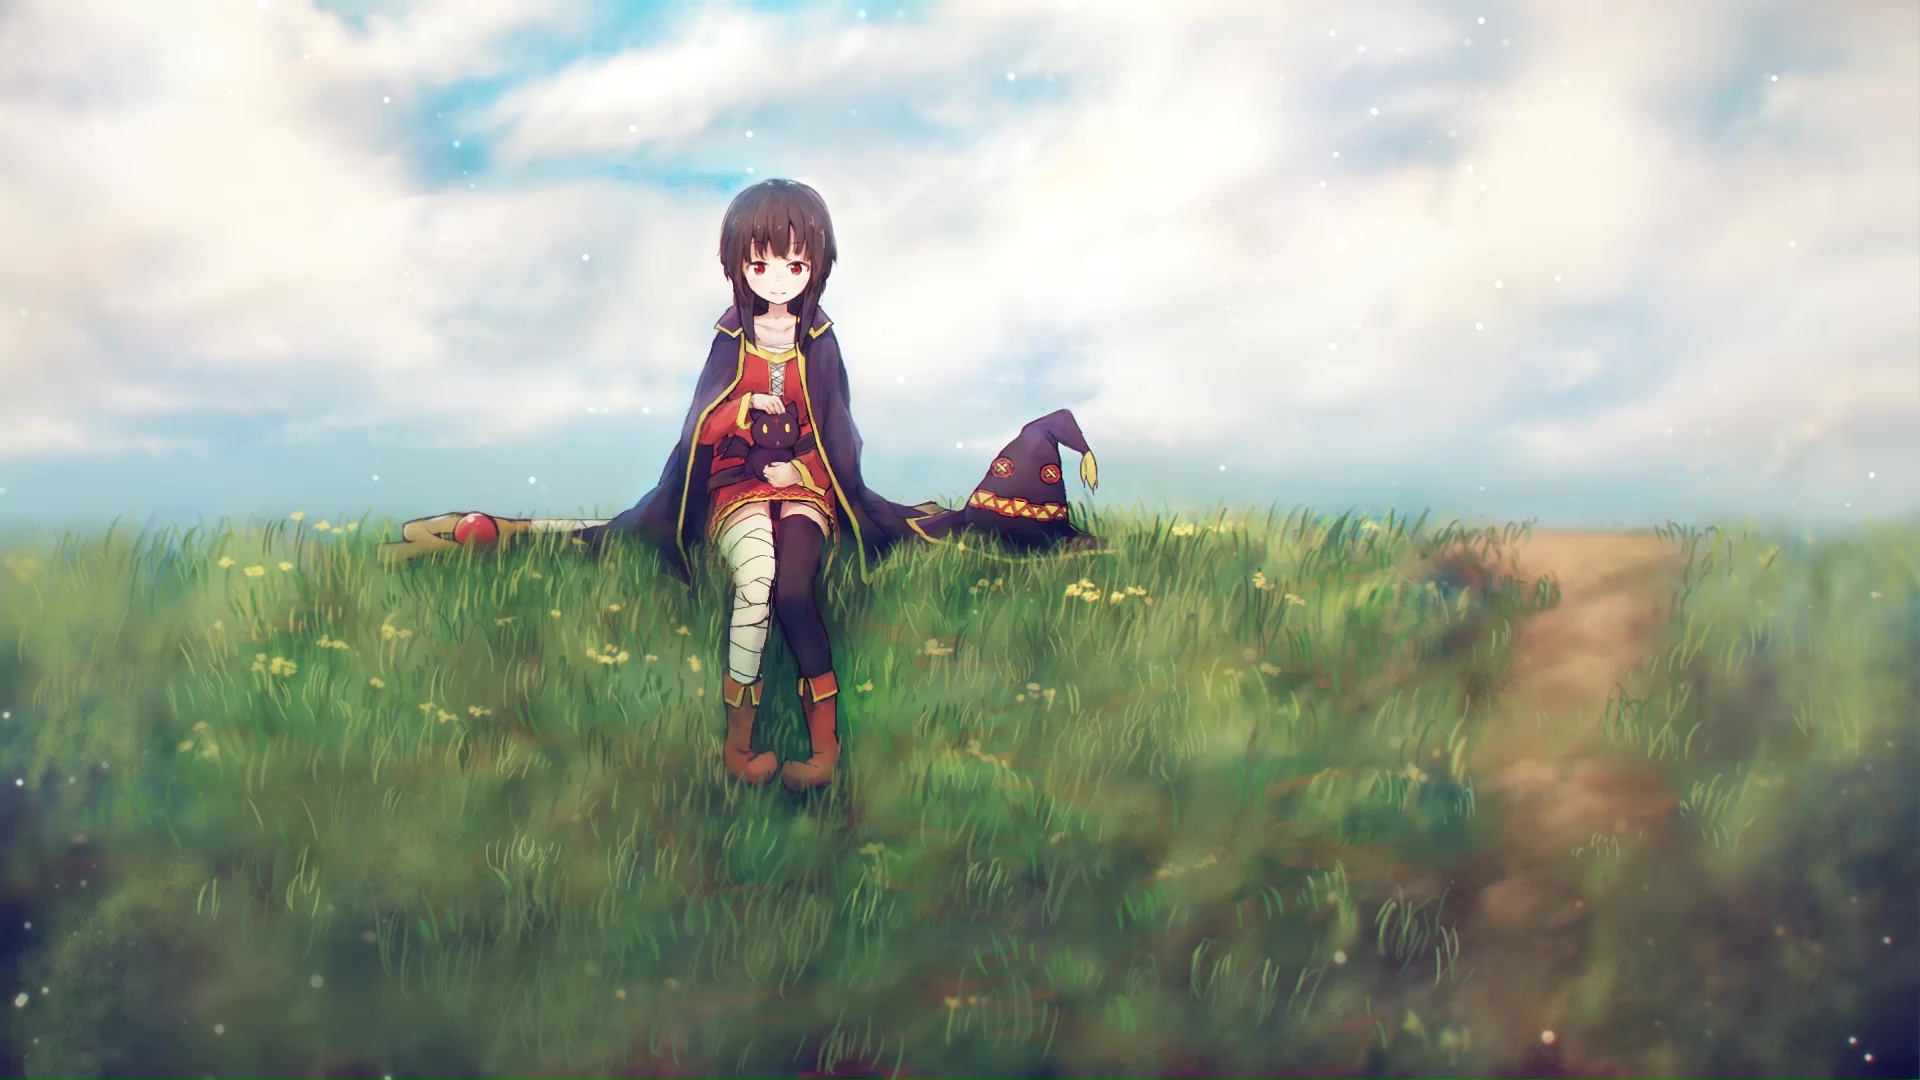 Megumin in Yukata Anime Girl Live Wallpapers APK for Android Download